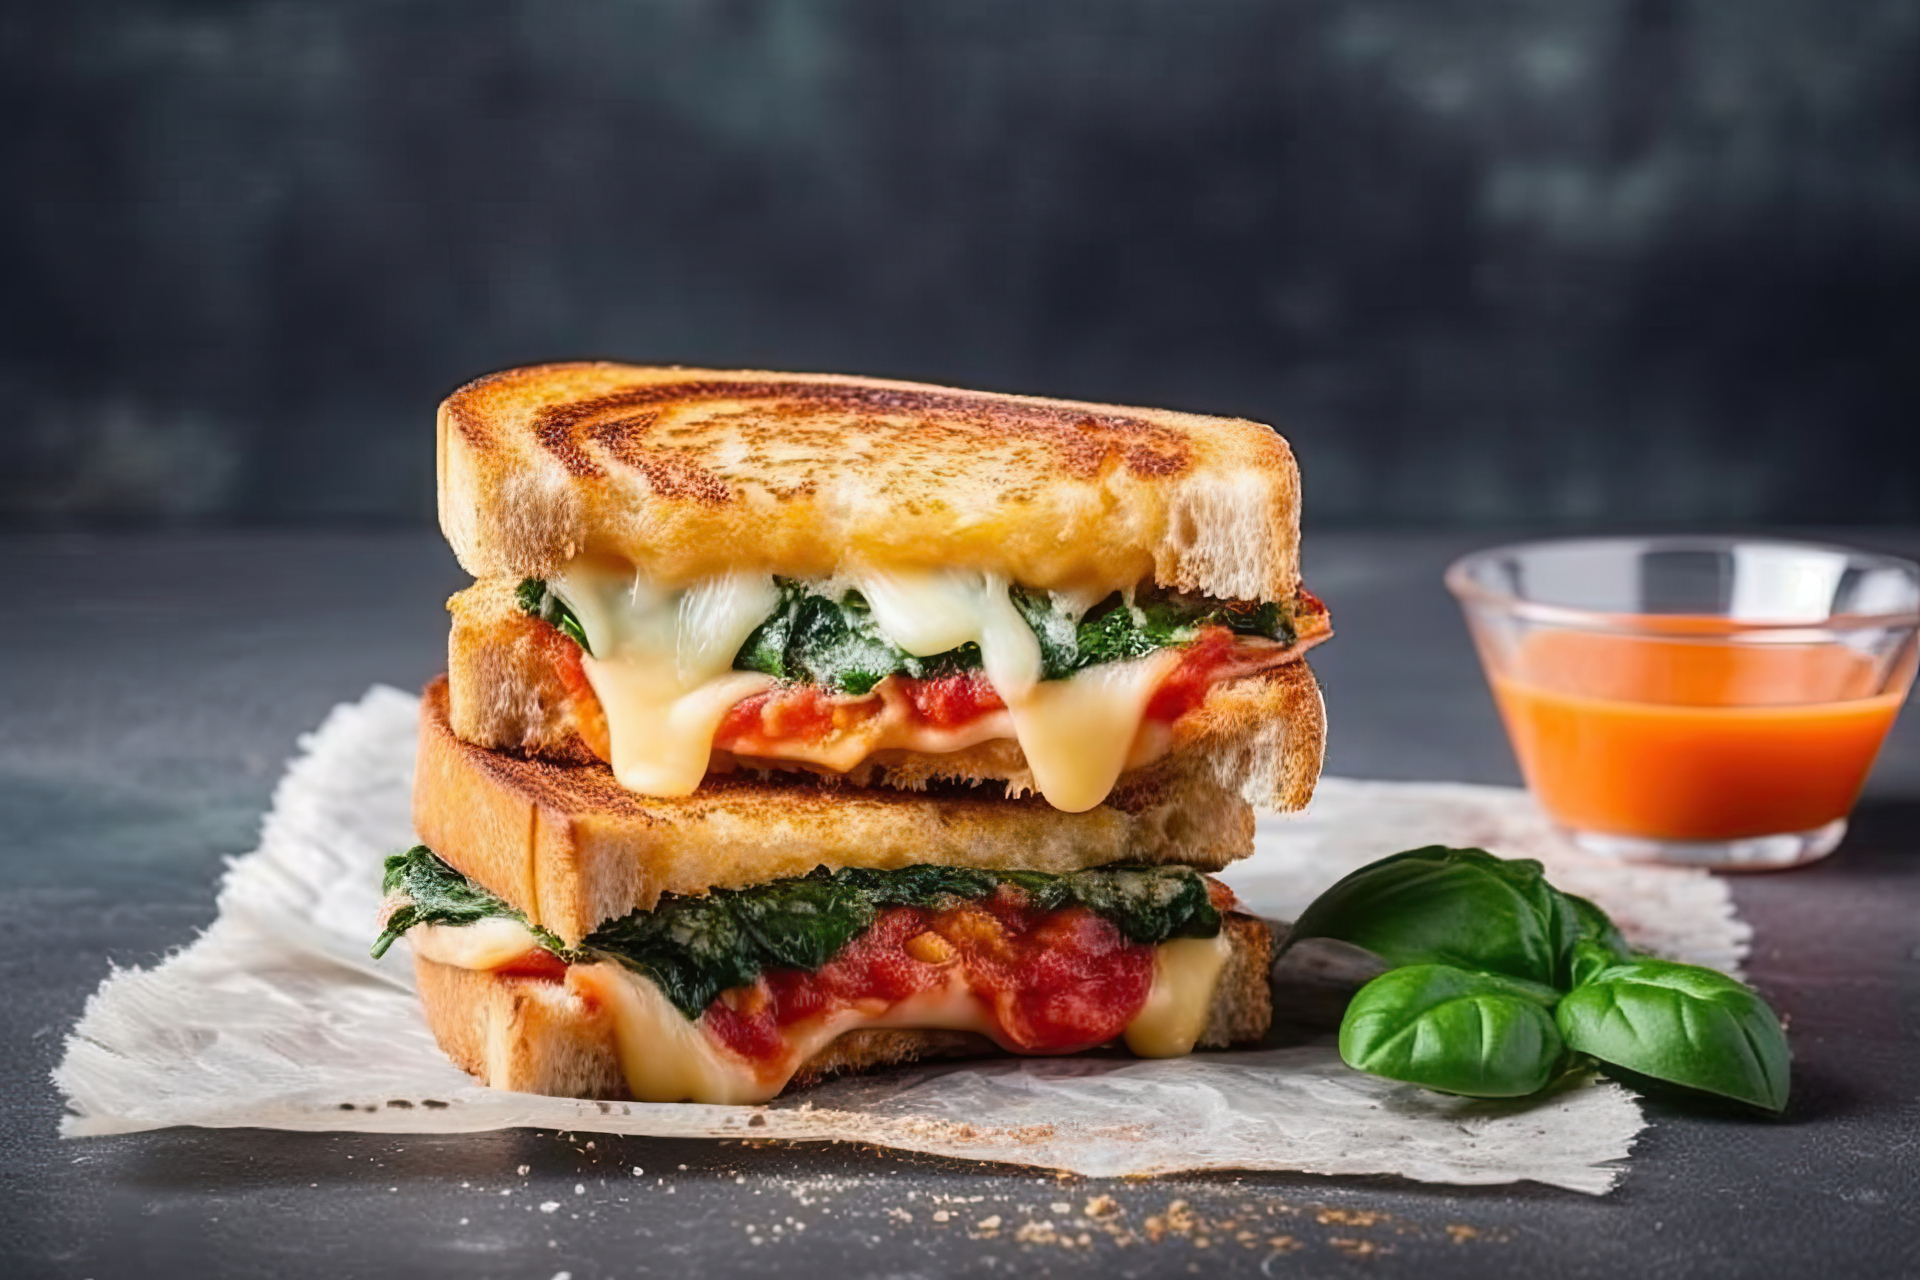 Cheese toastie with spinach and tomato